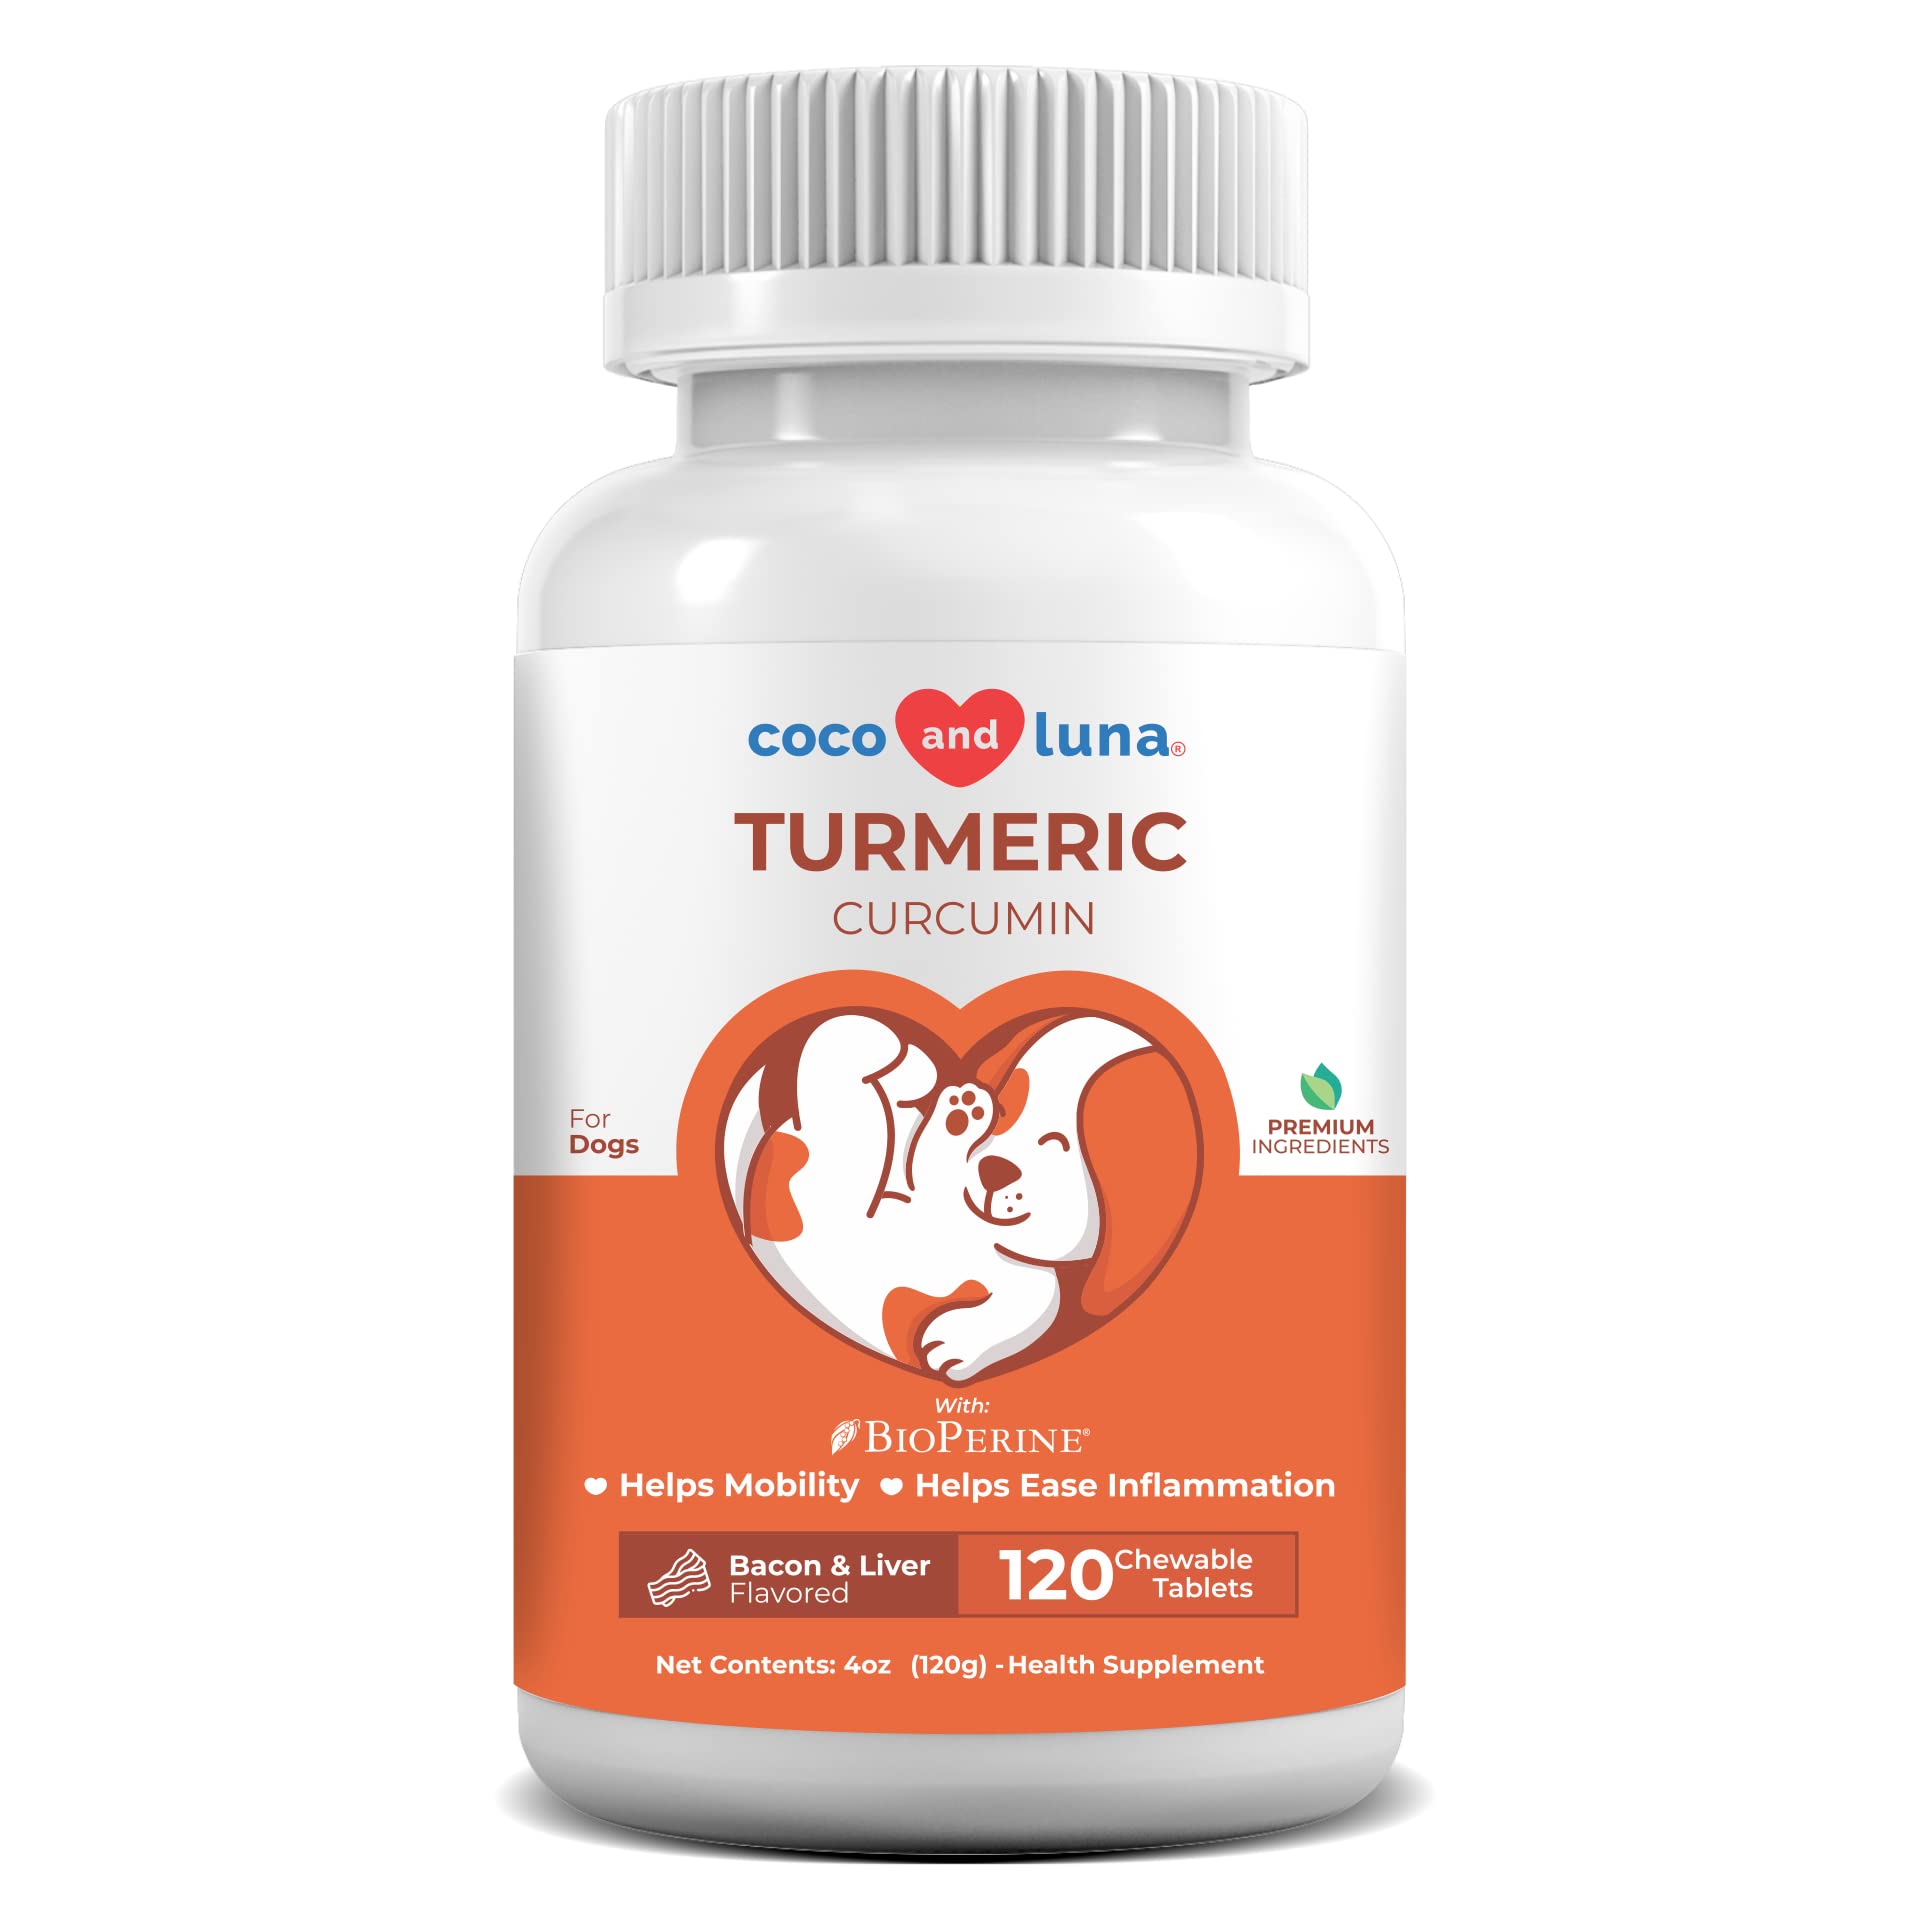 Coco and Luna Turmeric for Dogs Anti Inflammatory Pain Relief - 120 Chewable Tablets Hip & Joint Support with Curcumin and BioPerine, Antioxid